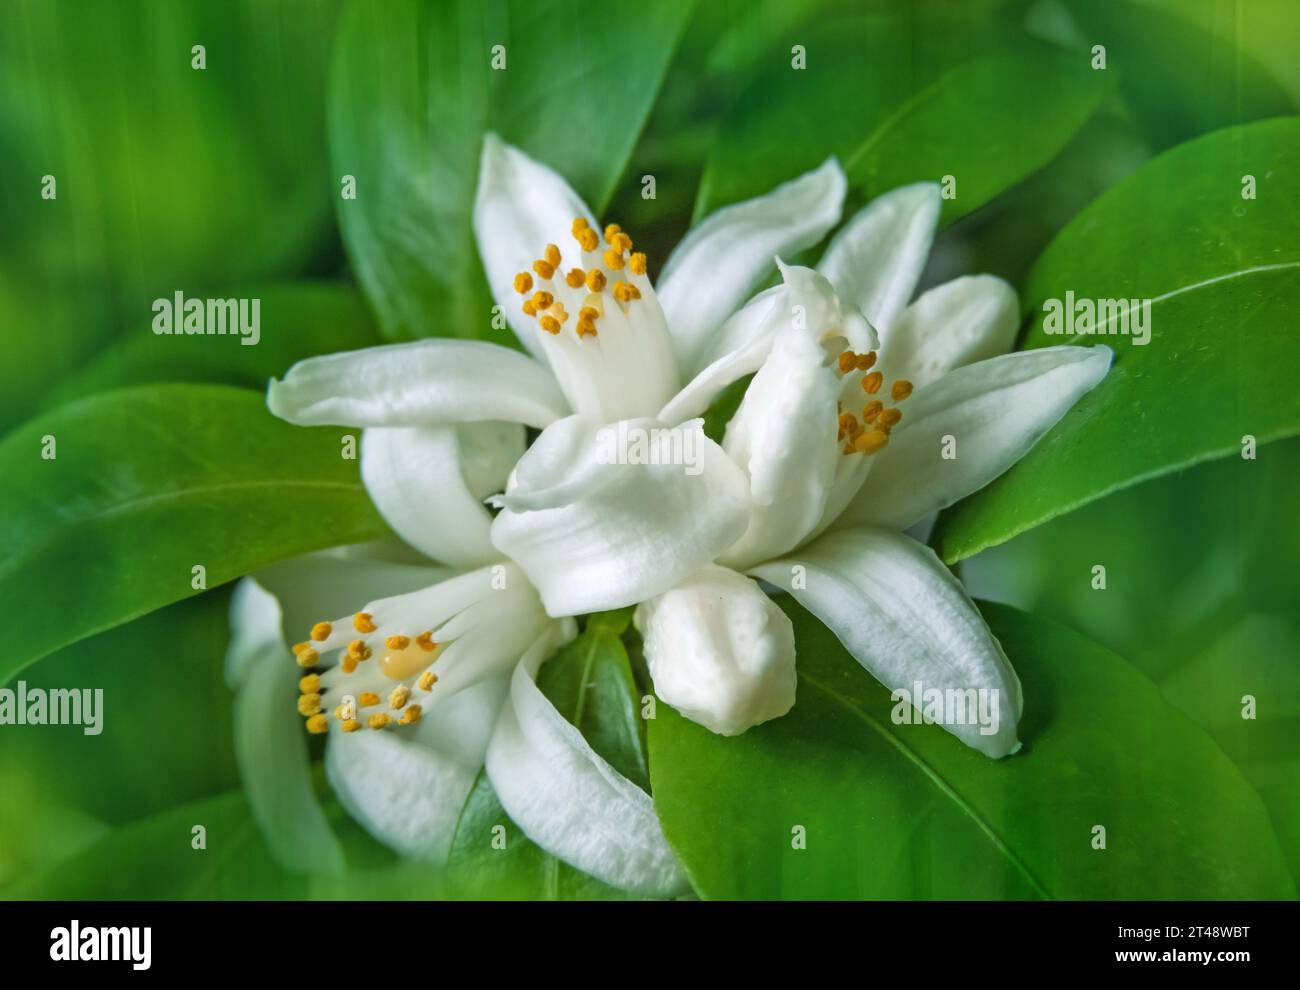 White orange tree flowers and buds bunch. Calamondin blossom on the blurred textured garden background. Stock Photo